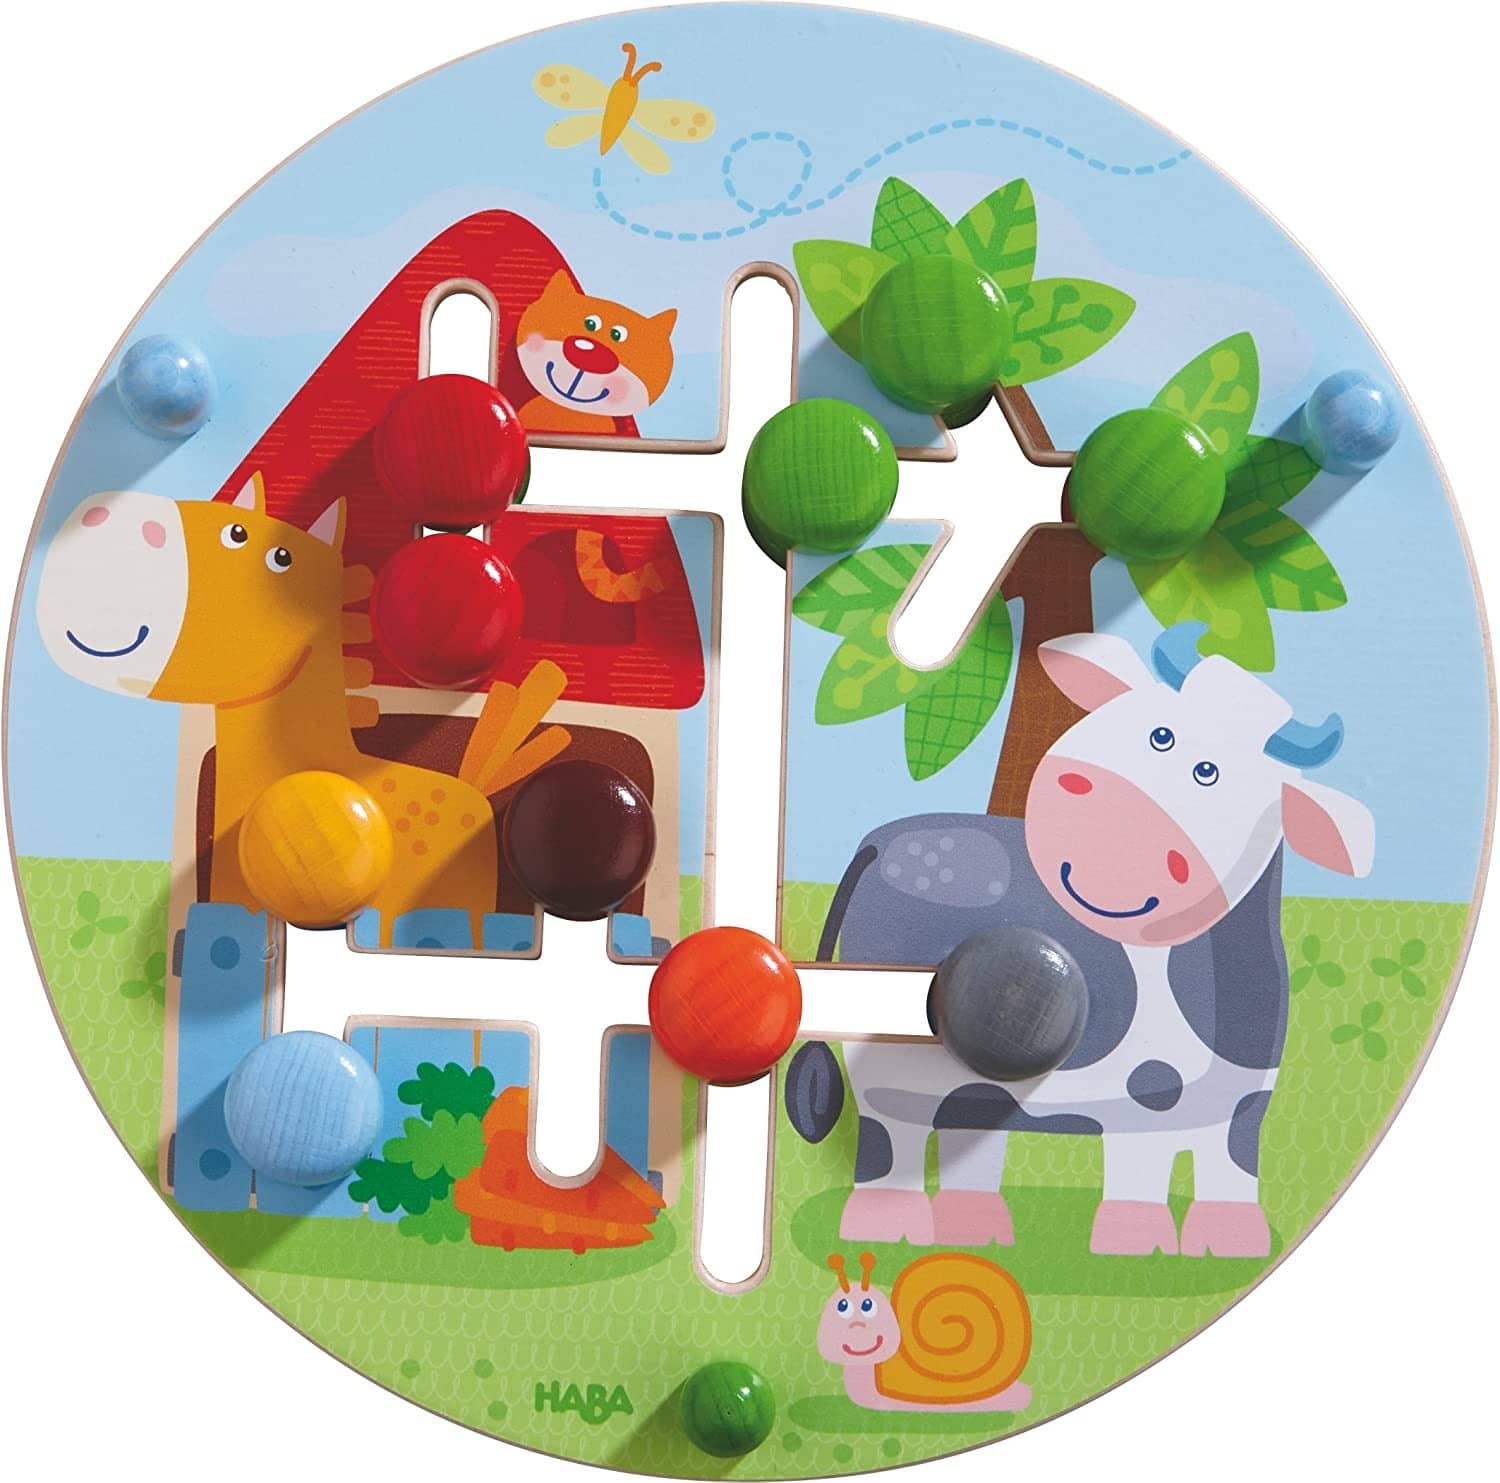 Motor Skills Board On The Farm - Double Sided Wooden Color And Shape Recognition Fun Ages 1 +-Kidding Around NYC